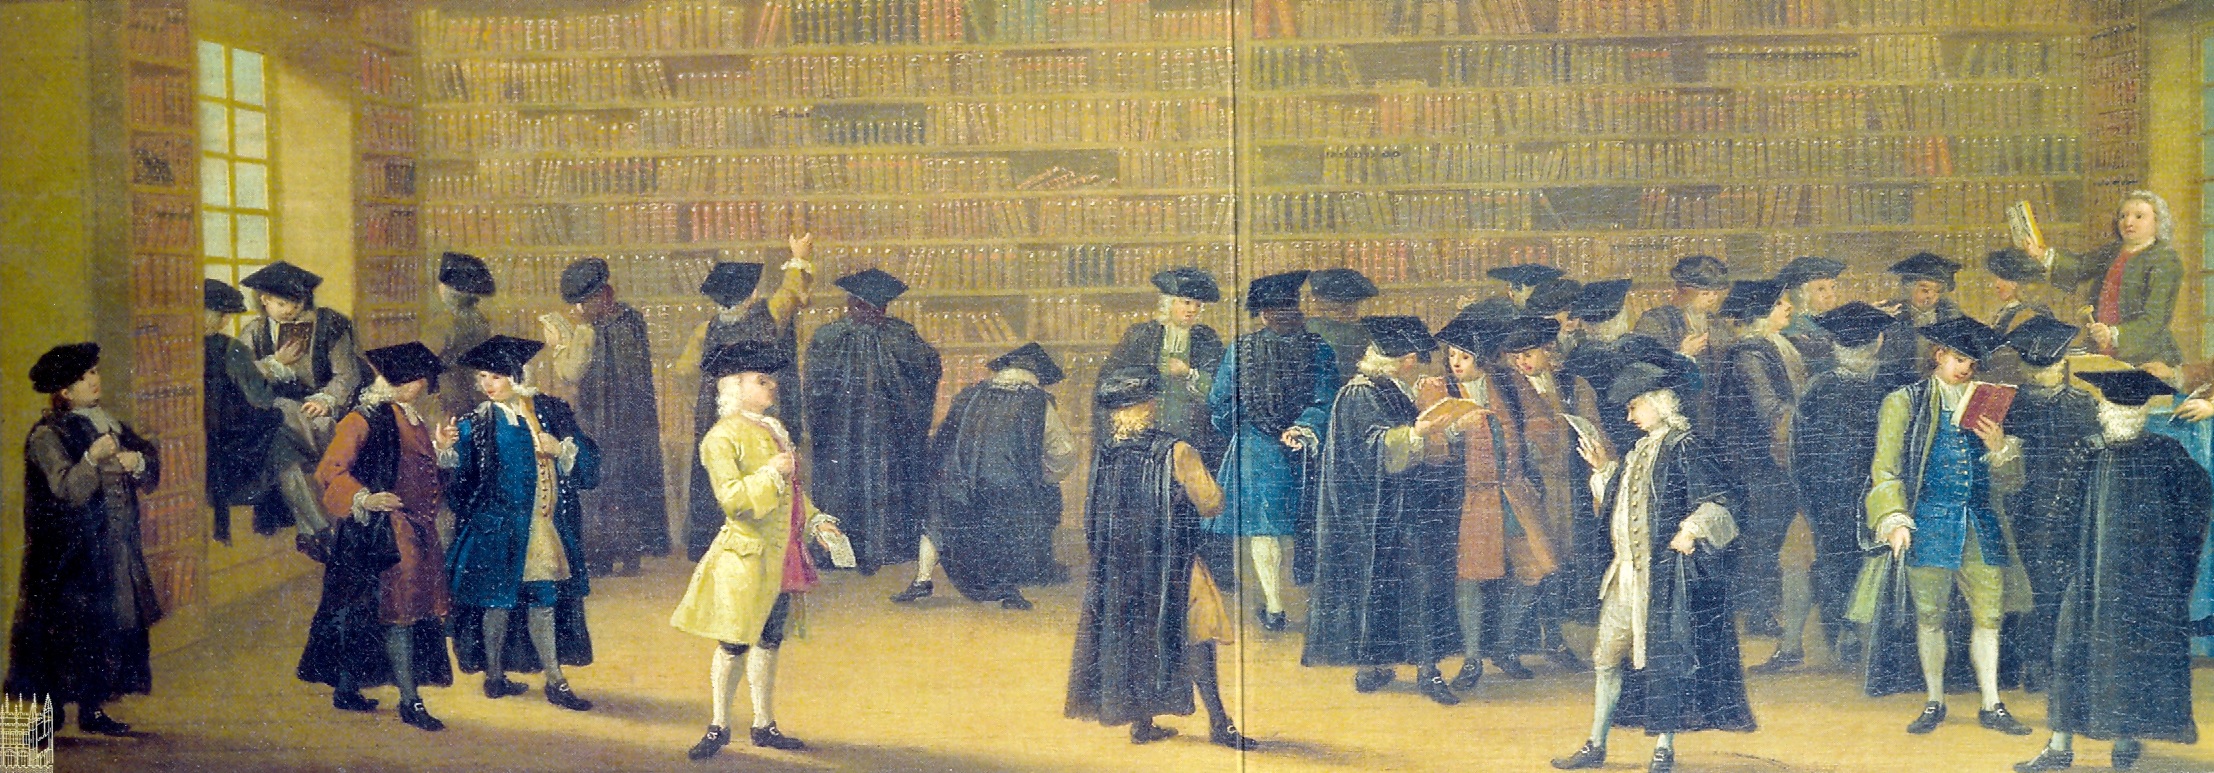 Image of busy book auction, Oxford, 1747.